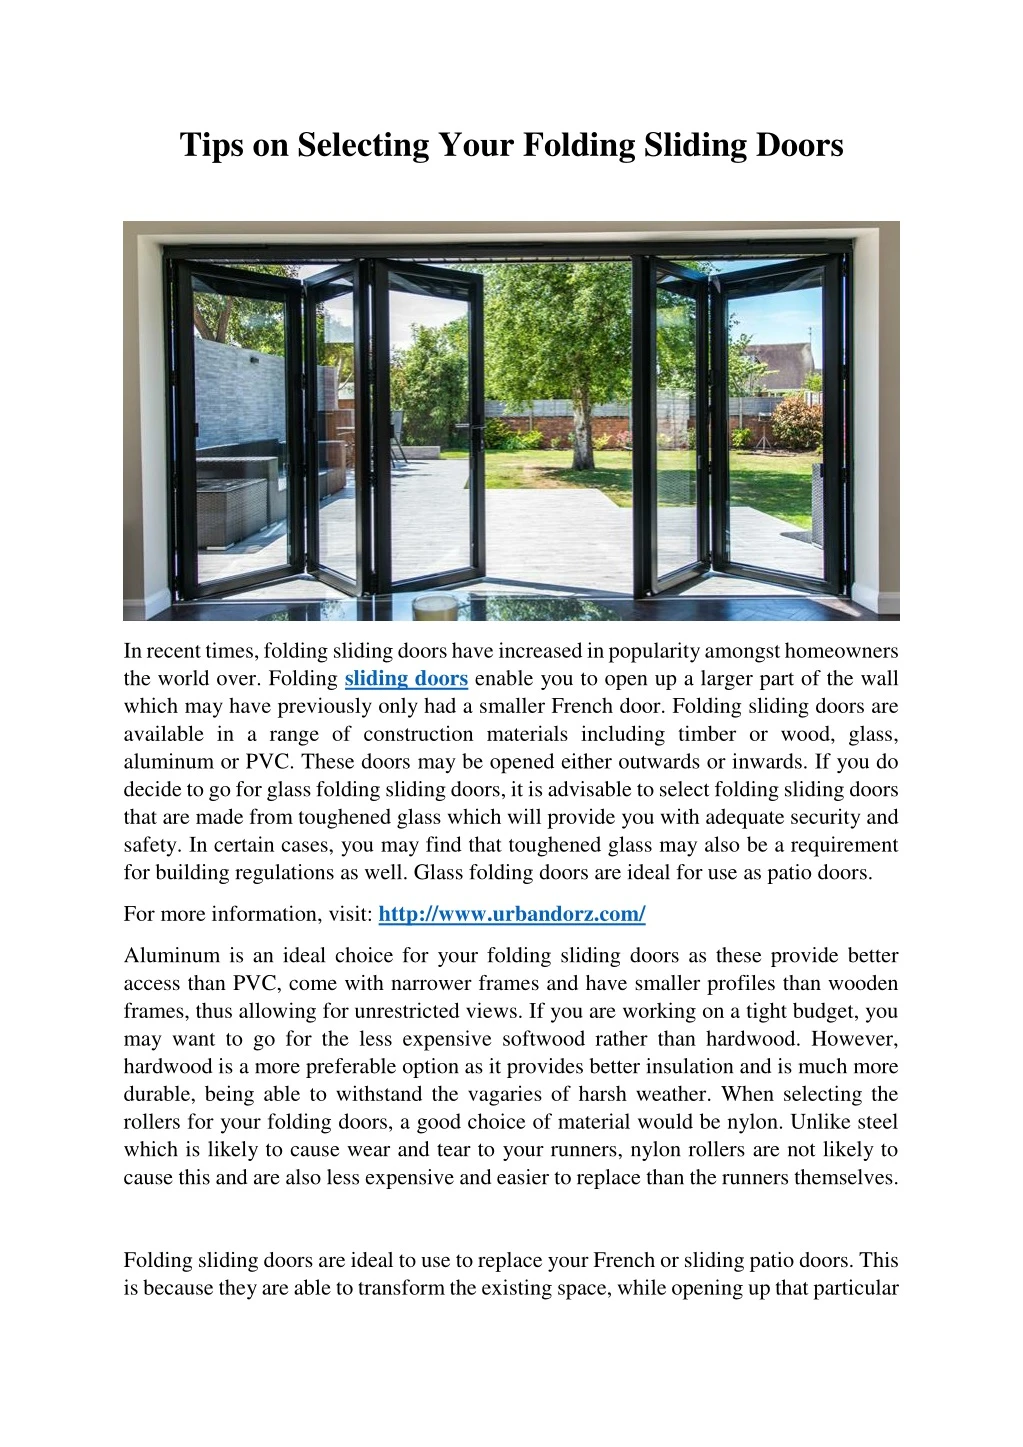 tips on selecting your folding sliding doors